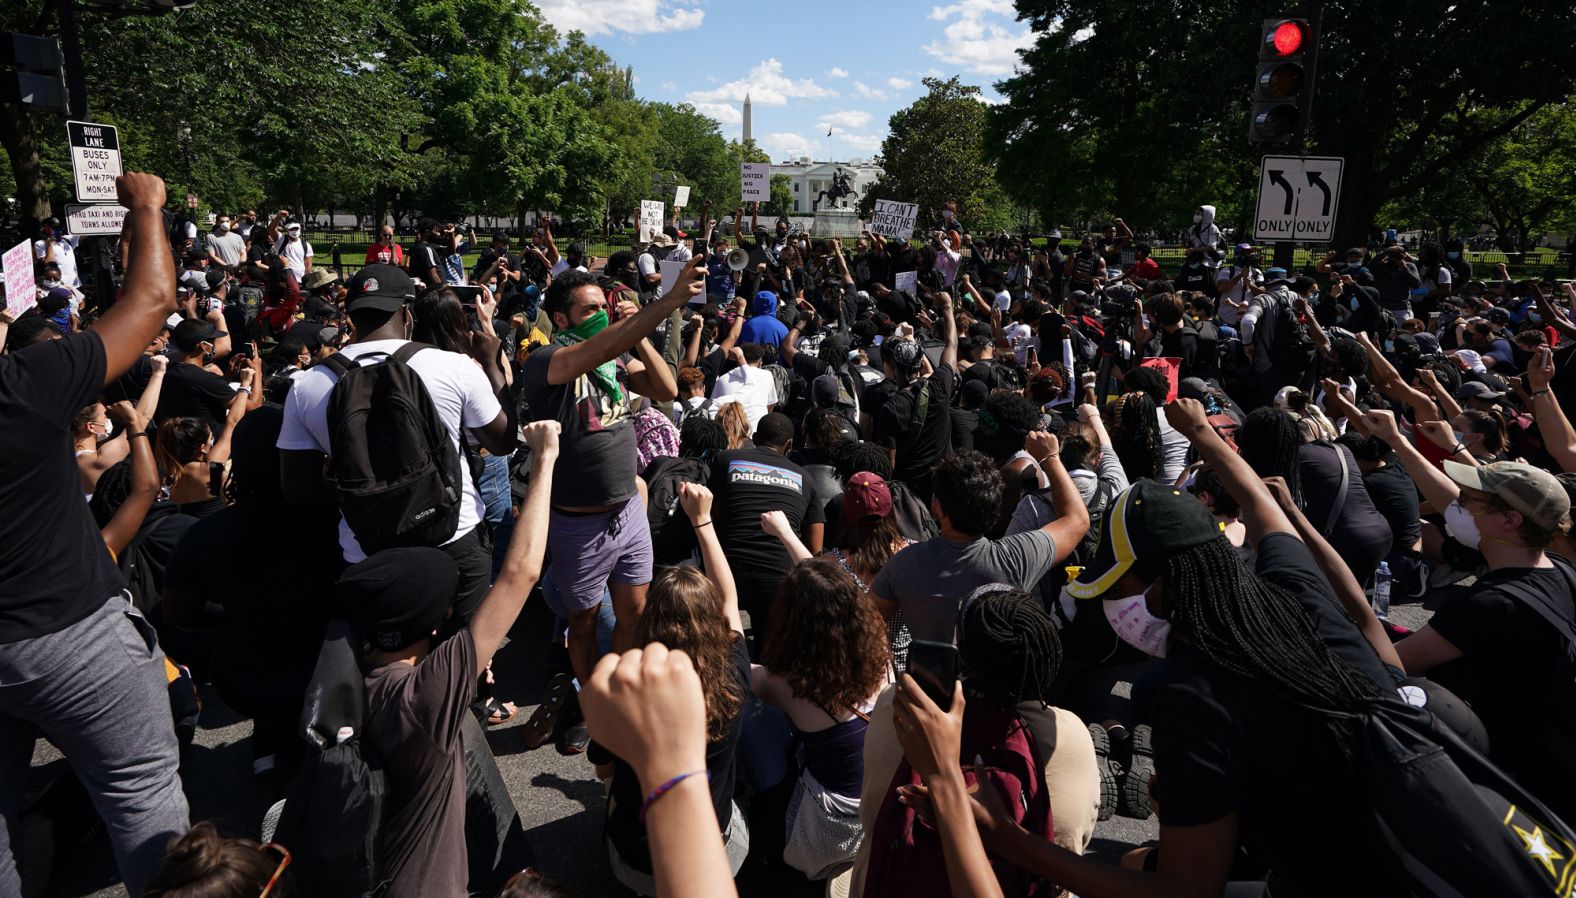 Demonstrators gather to protest near the White House on May 31.